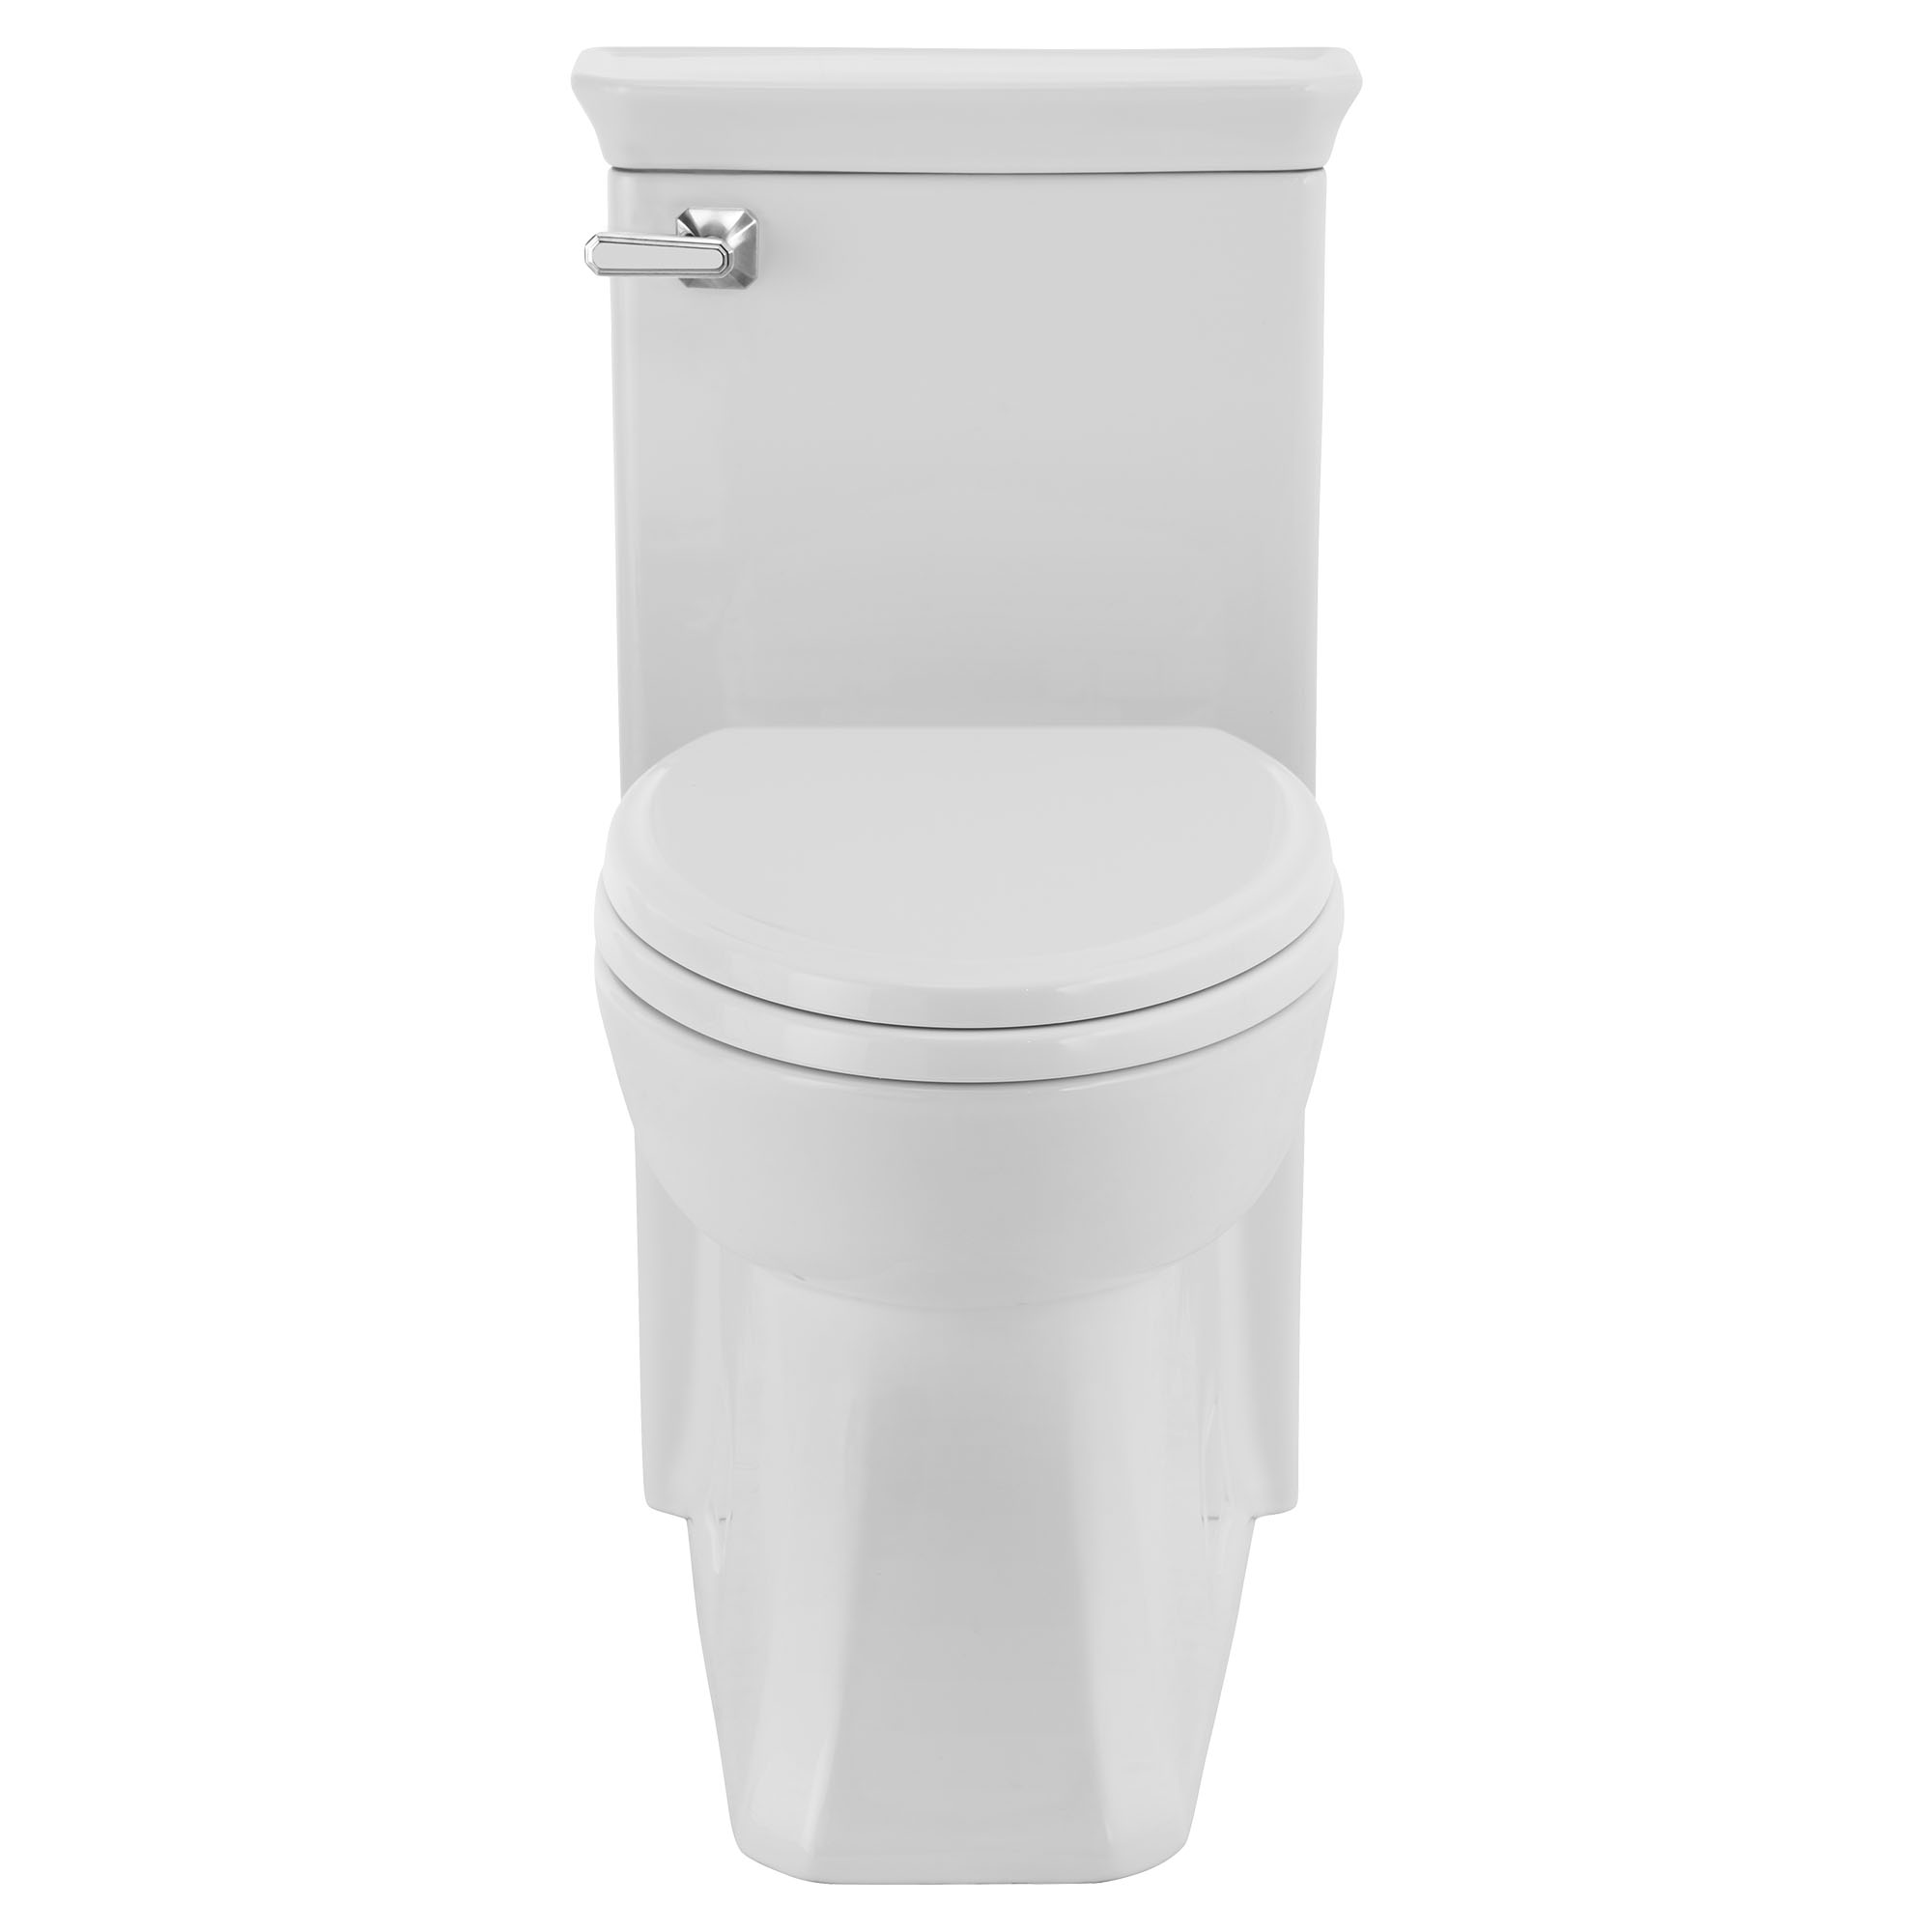 Belshire® One-Piece Chair Height Elongated Toilet with Seat